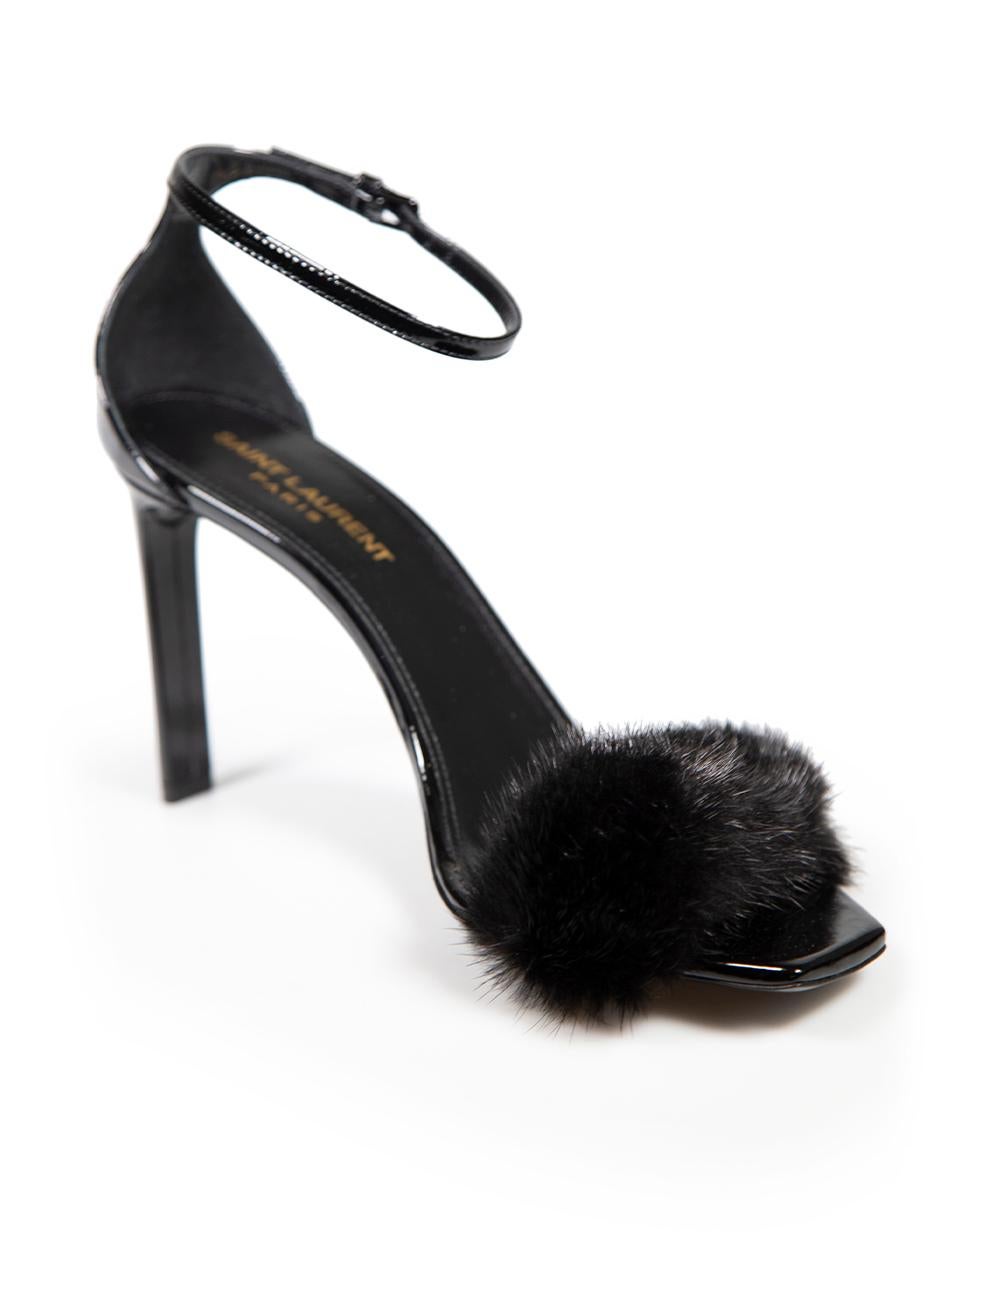 CONDITION is Never worn. No visible wear to shoes is evident on this new Saint Laurent designer resale item. These shoes come with original box and dust bags.
 
 
 
 Details
 
 
 Black
 
 Patent leather
 
 Hells
 
 Mid heel
 
 Fur strap
 
